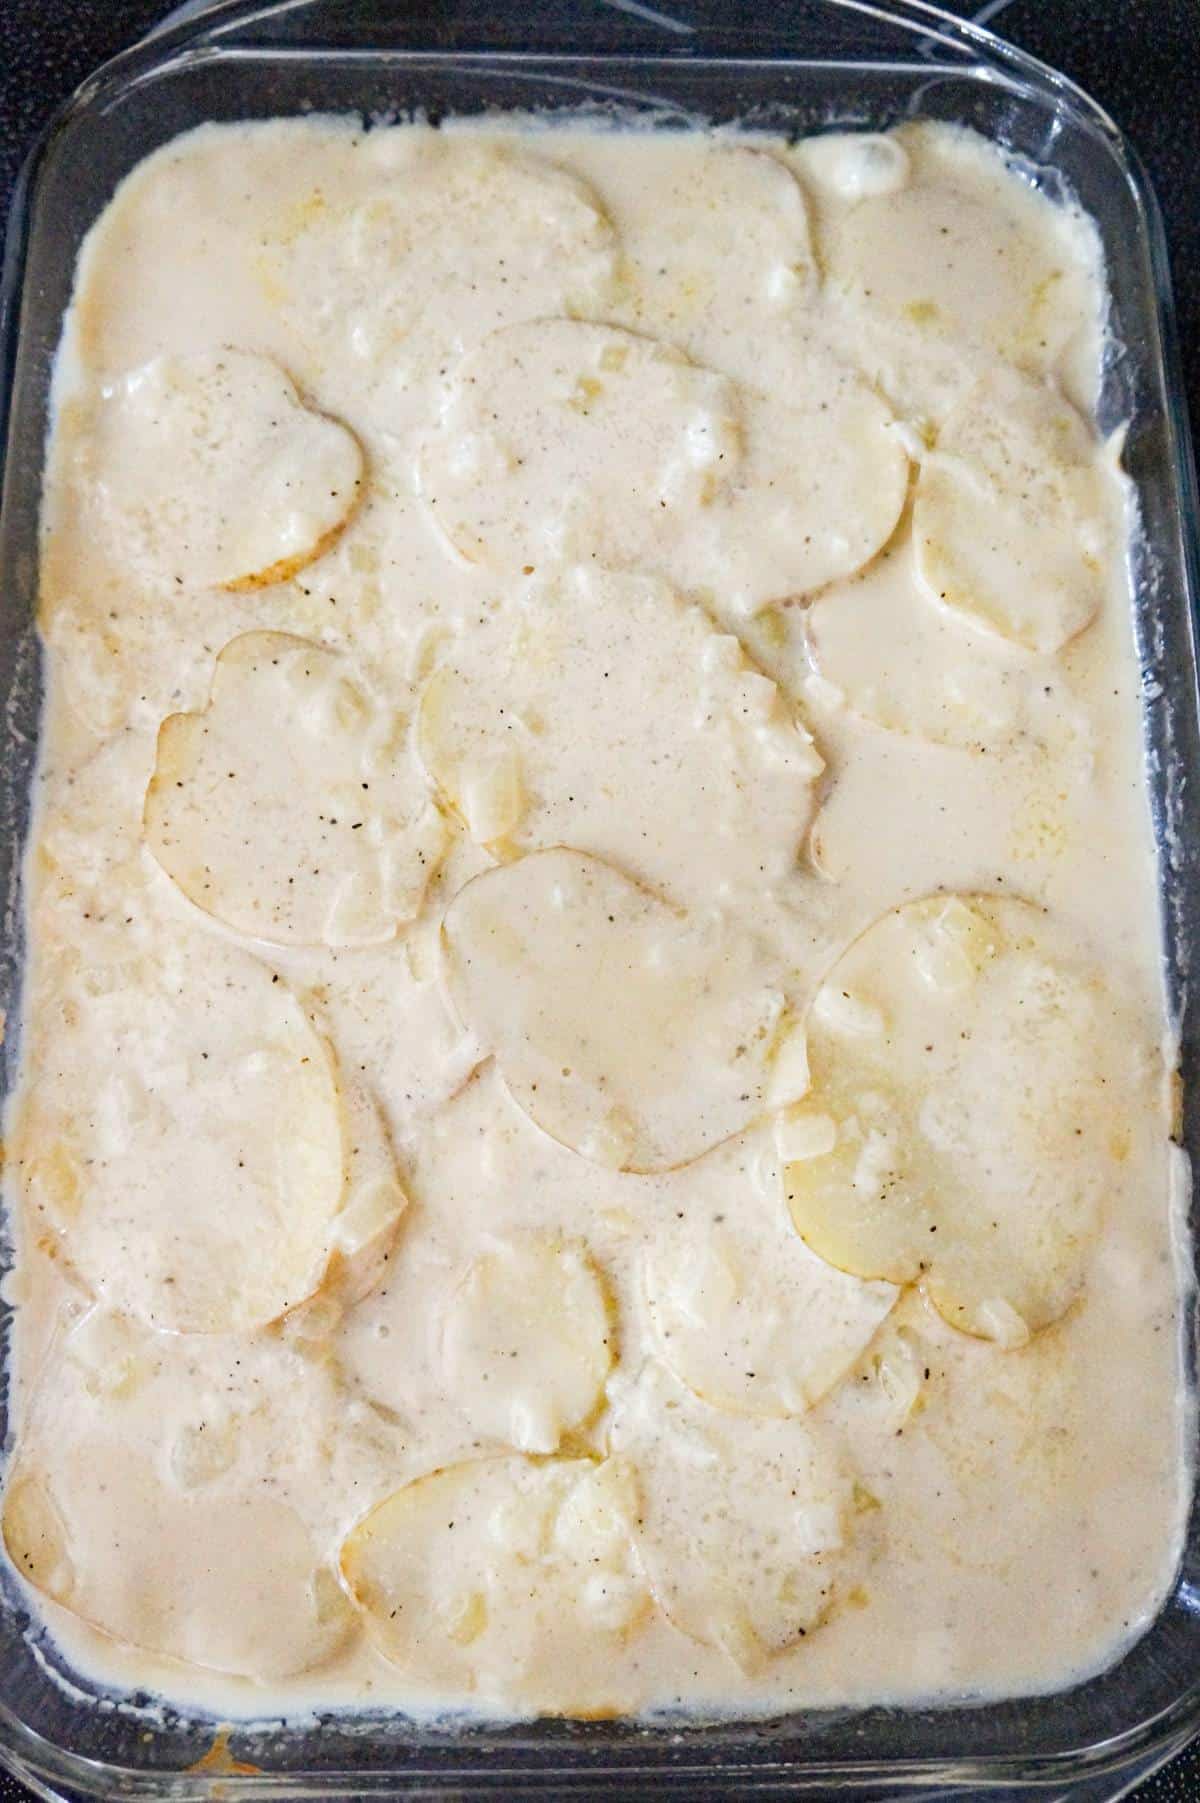 scalloped potatoes after removing aluminum foil